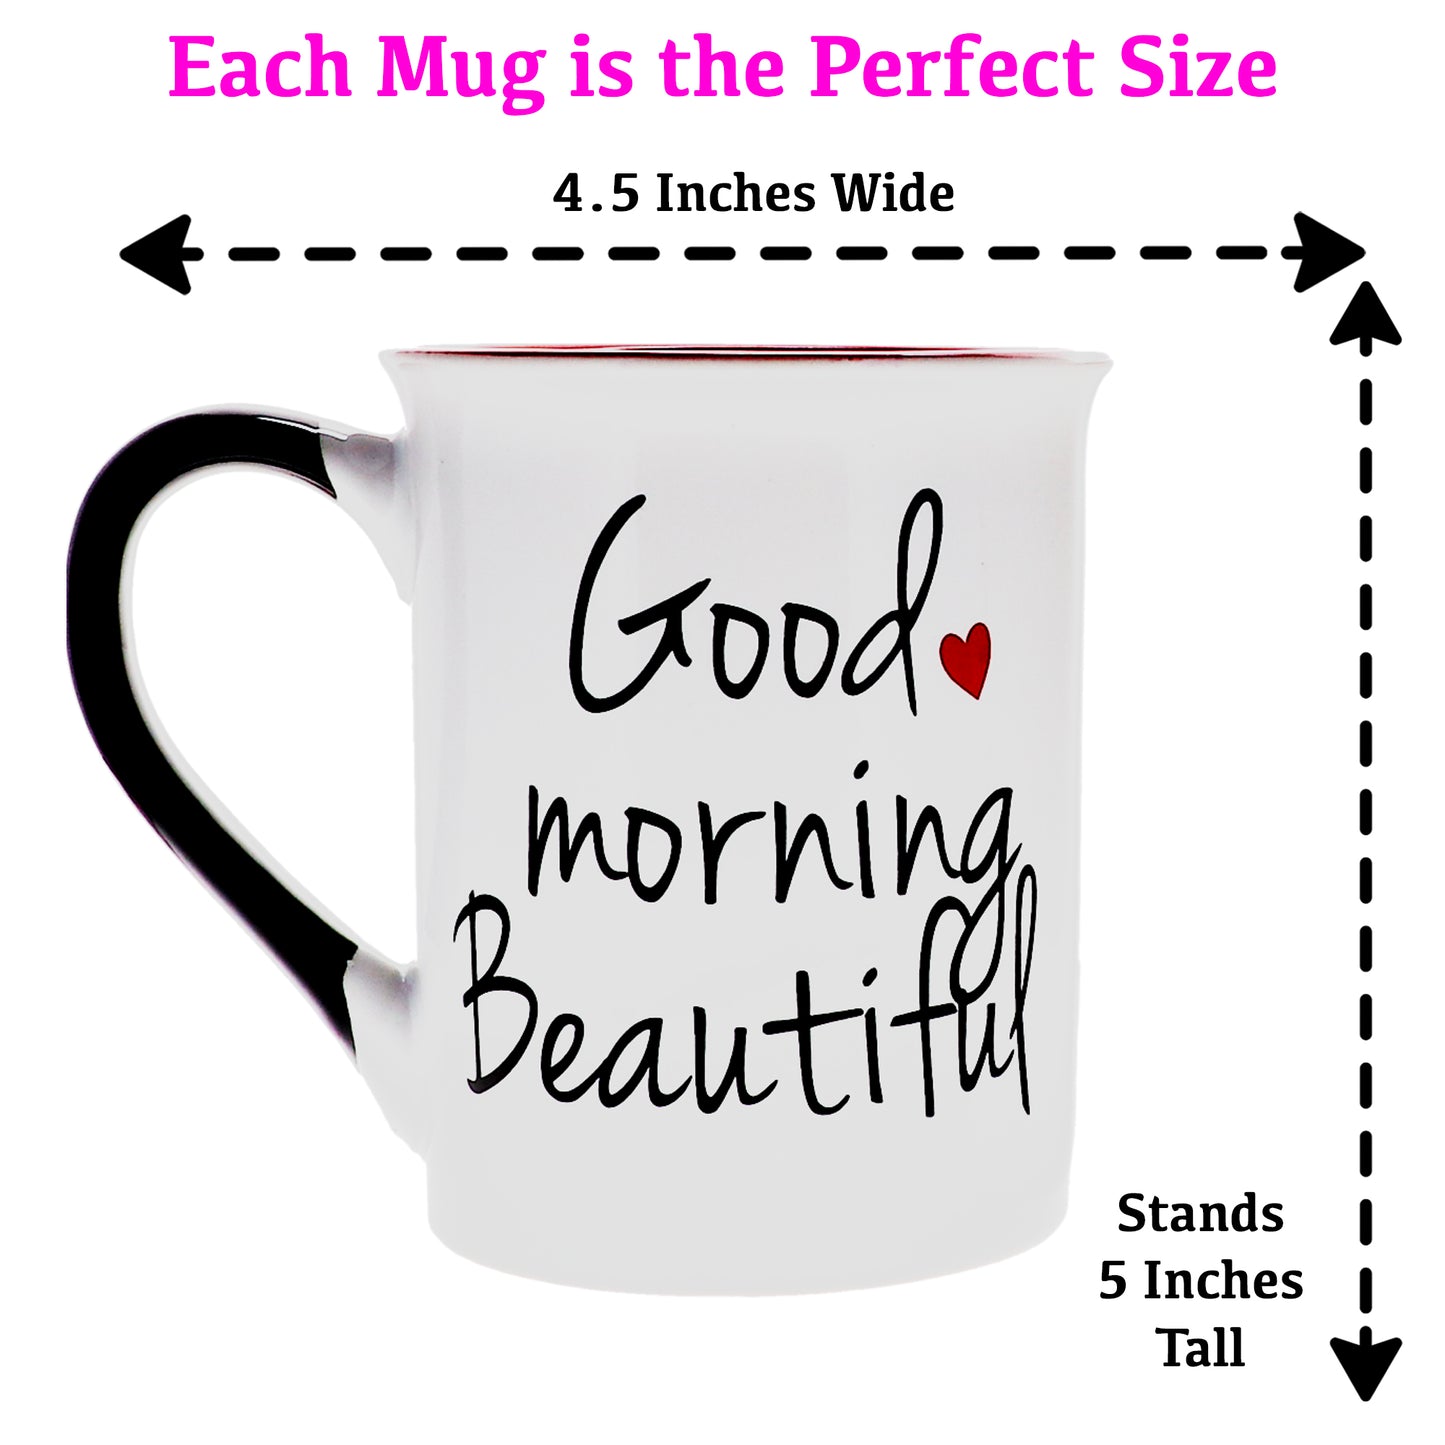 Cottage Creek Good Morning Beautiful and Good Morning Handsome Coffee Mugs, Set of Two Ceramic, Multicolored, 6" Couples Mugs